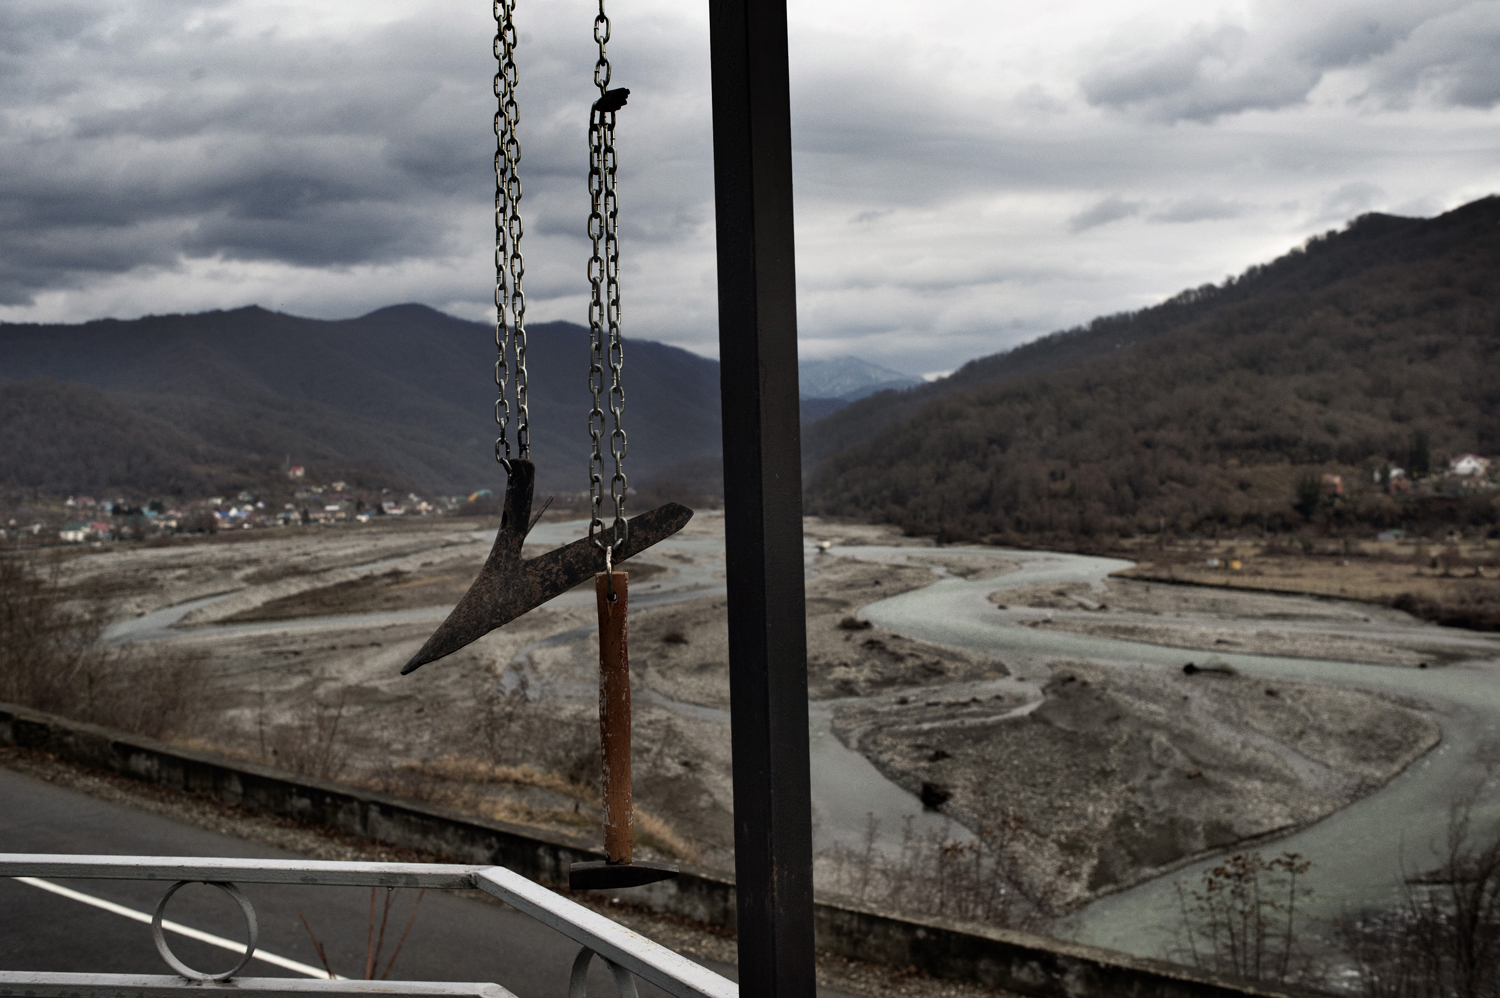 Sochi, Russia, Jan. 18, 2014: Villages of the Kichmay valley, populated mostly by ethnic Circassians, are seen from atop a monument to the Circassian warriors who died while resisting the Russian invasion of this part of the Caucasus Mountains in the 19th Century.